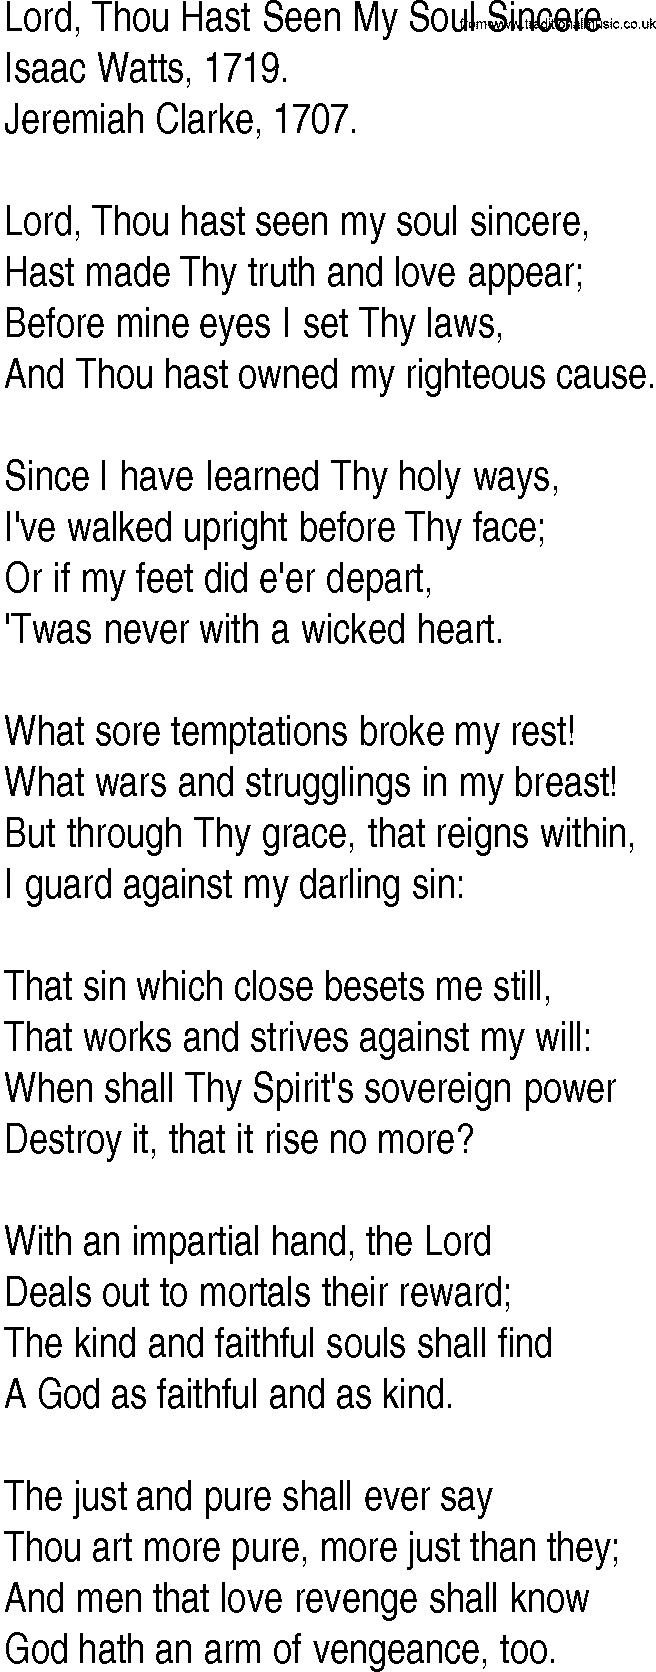 Hymn and Gospel Song: Lord, Thou Hast Seen My Soul Sincere by Isaac Watts lyrics